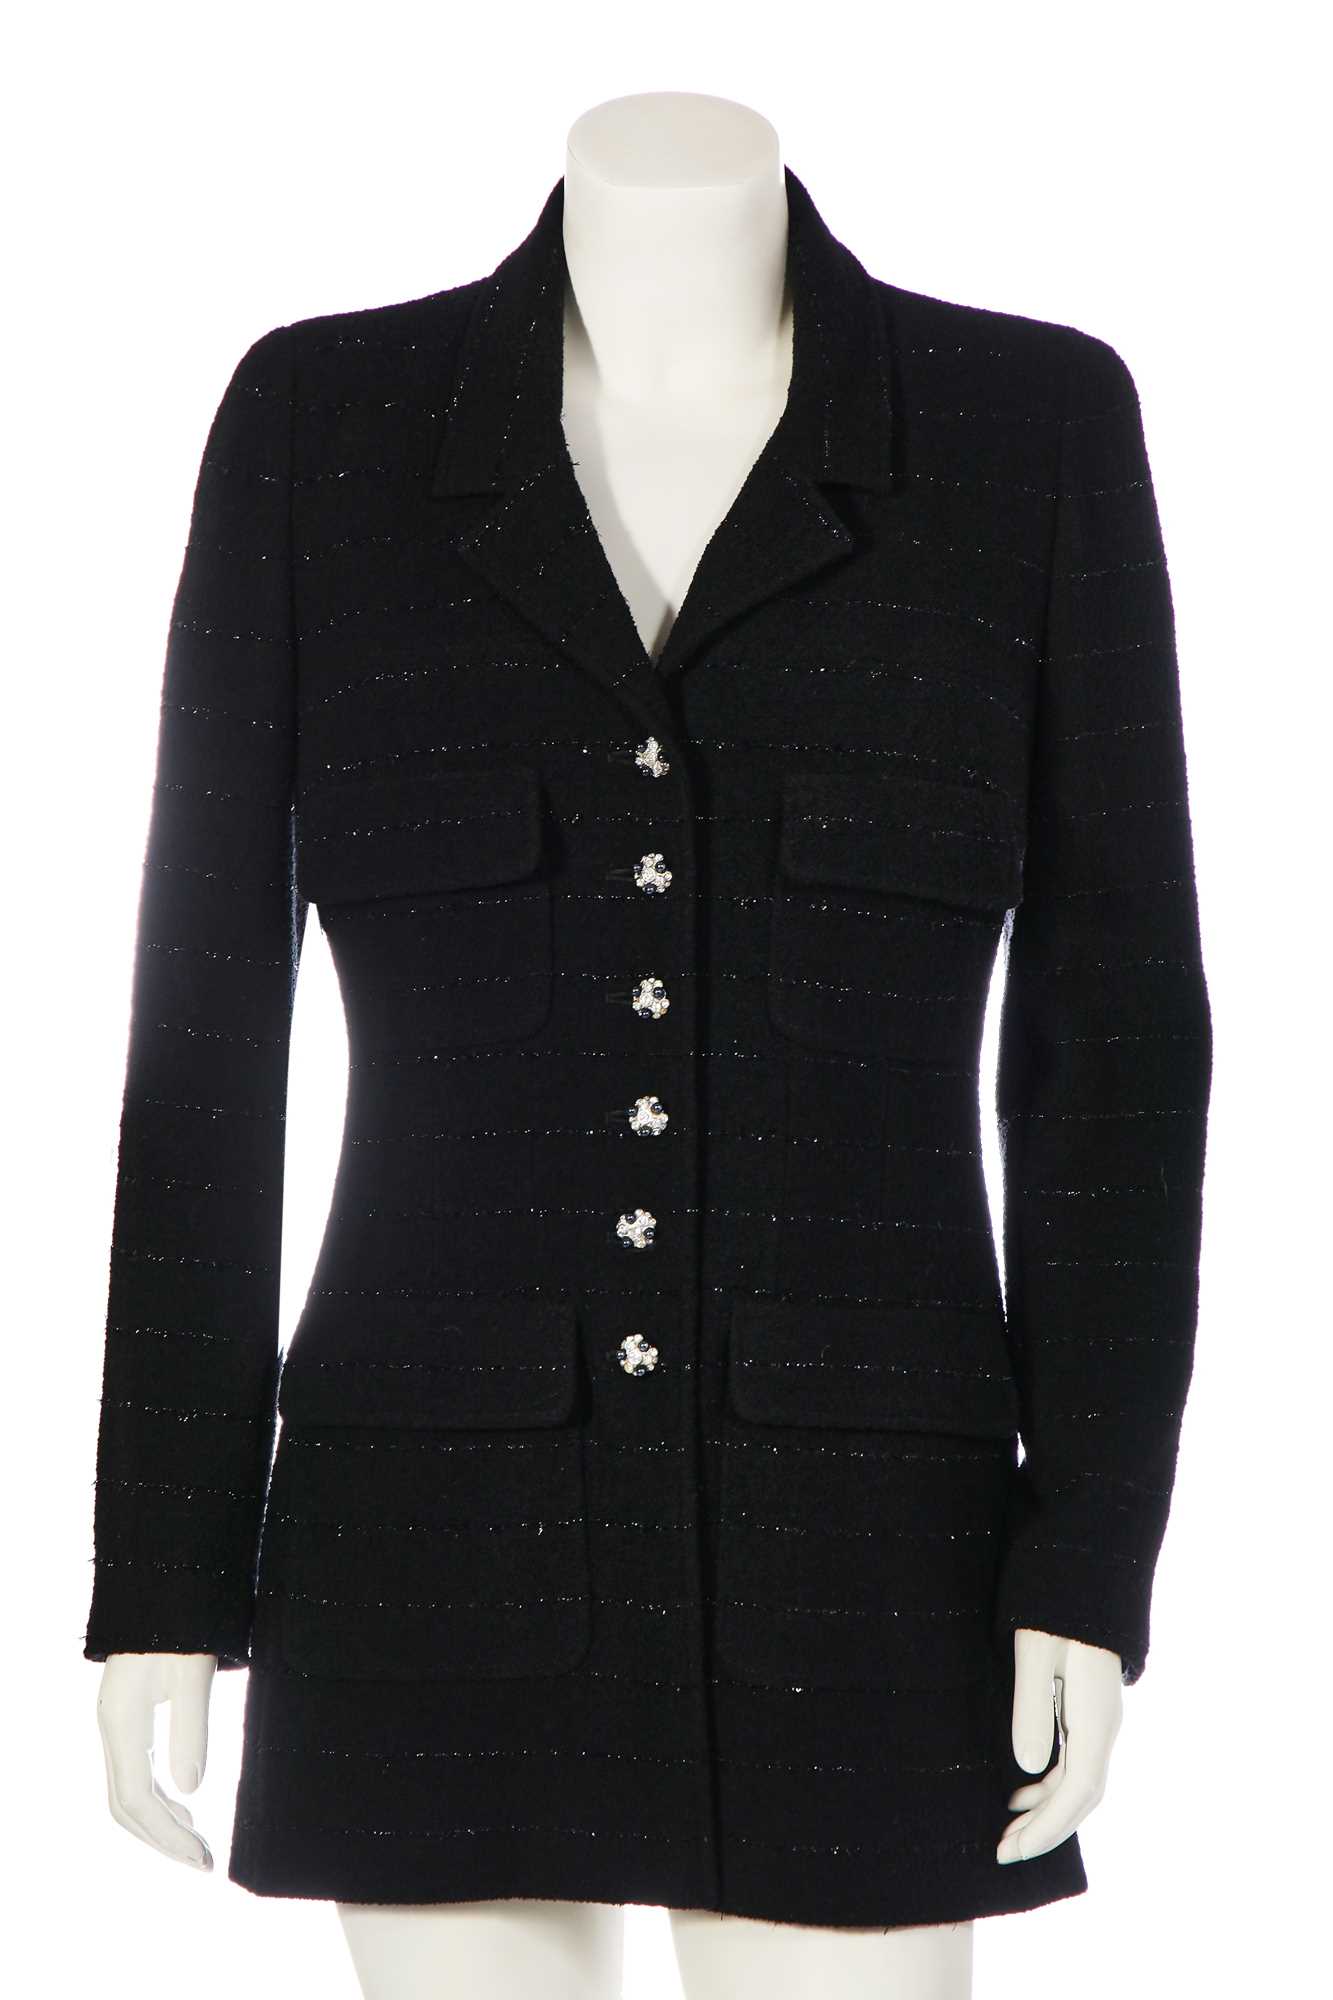 Lot 17 - A Chanel black wool jacket flecked with lurex stripes, Autumn-Winter 1995-96